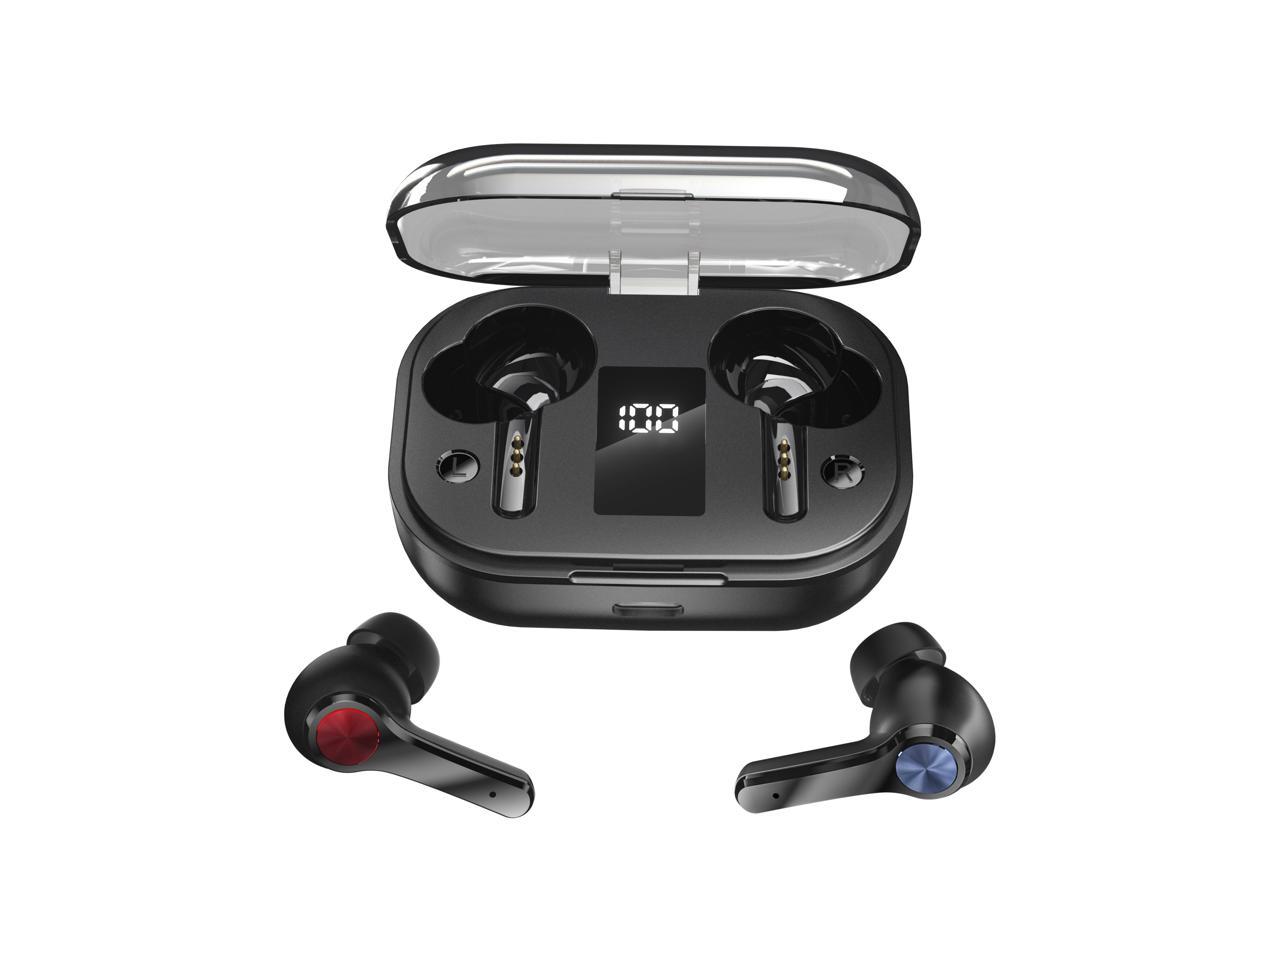 Wireless Bluetooth Earbuds Mini Waterproof Headphones Hands-Free Calling Earphones Sport Driving Headsets 5 Hour Playtime with Mic and Charging Box for Smart Phones and Other Smart Devices White 